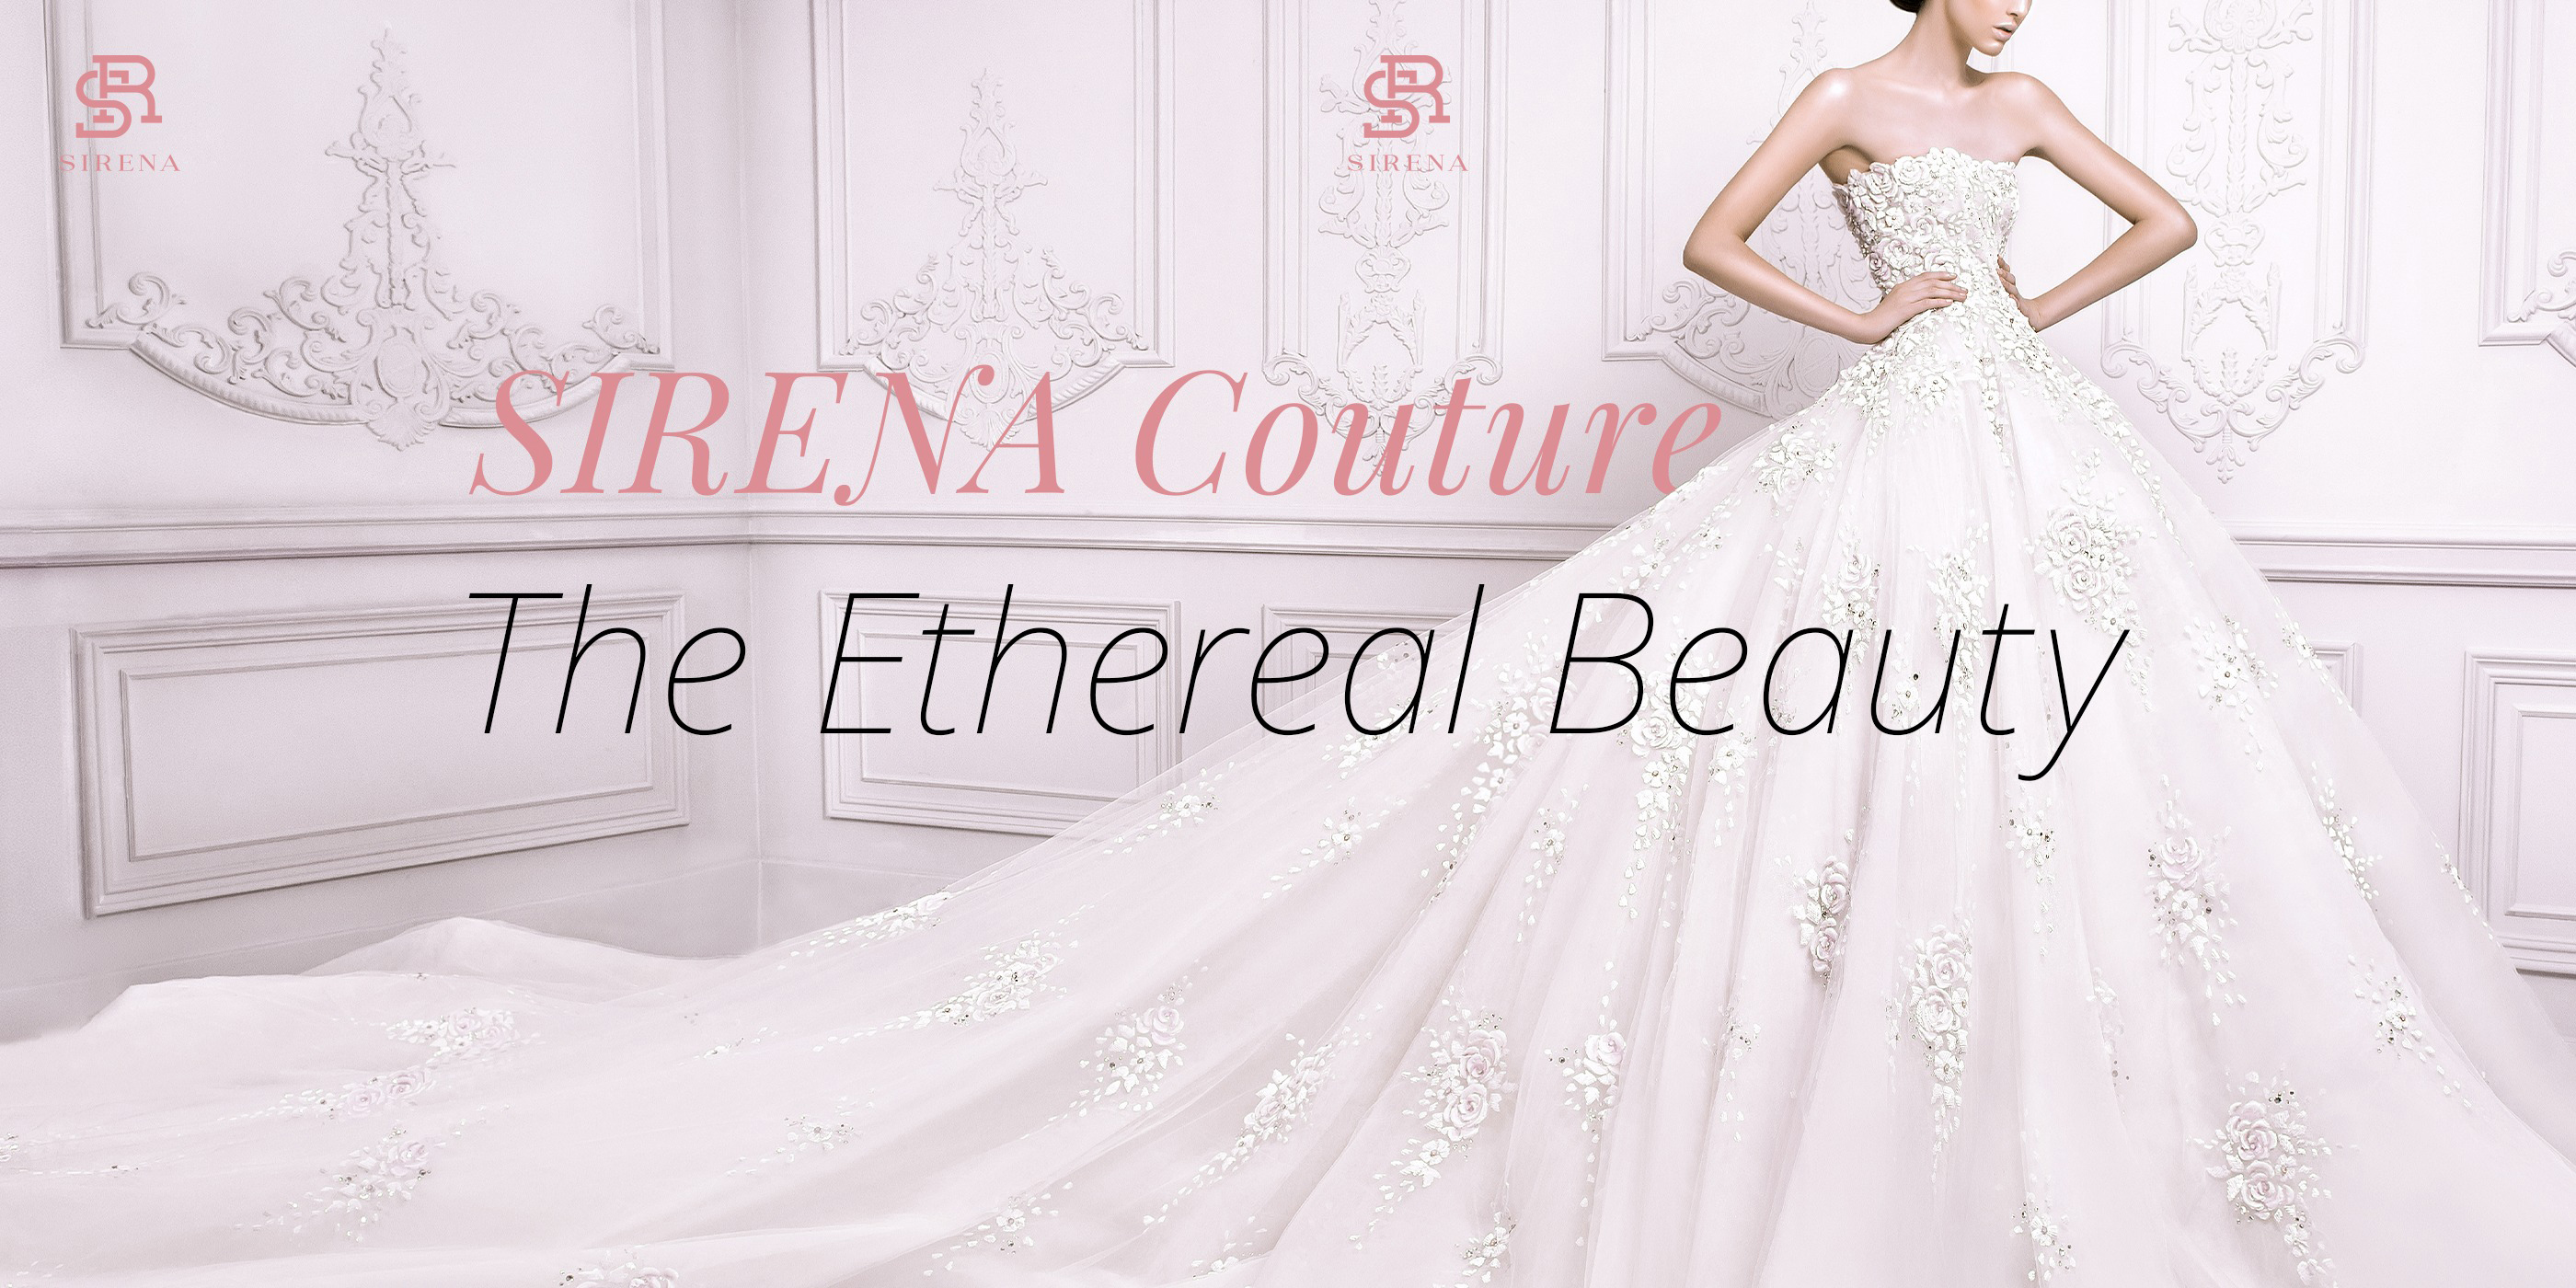 Introducing SIRENA Couture: The Ethereal Beauty